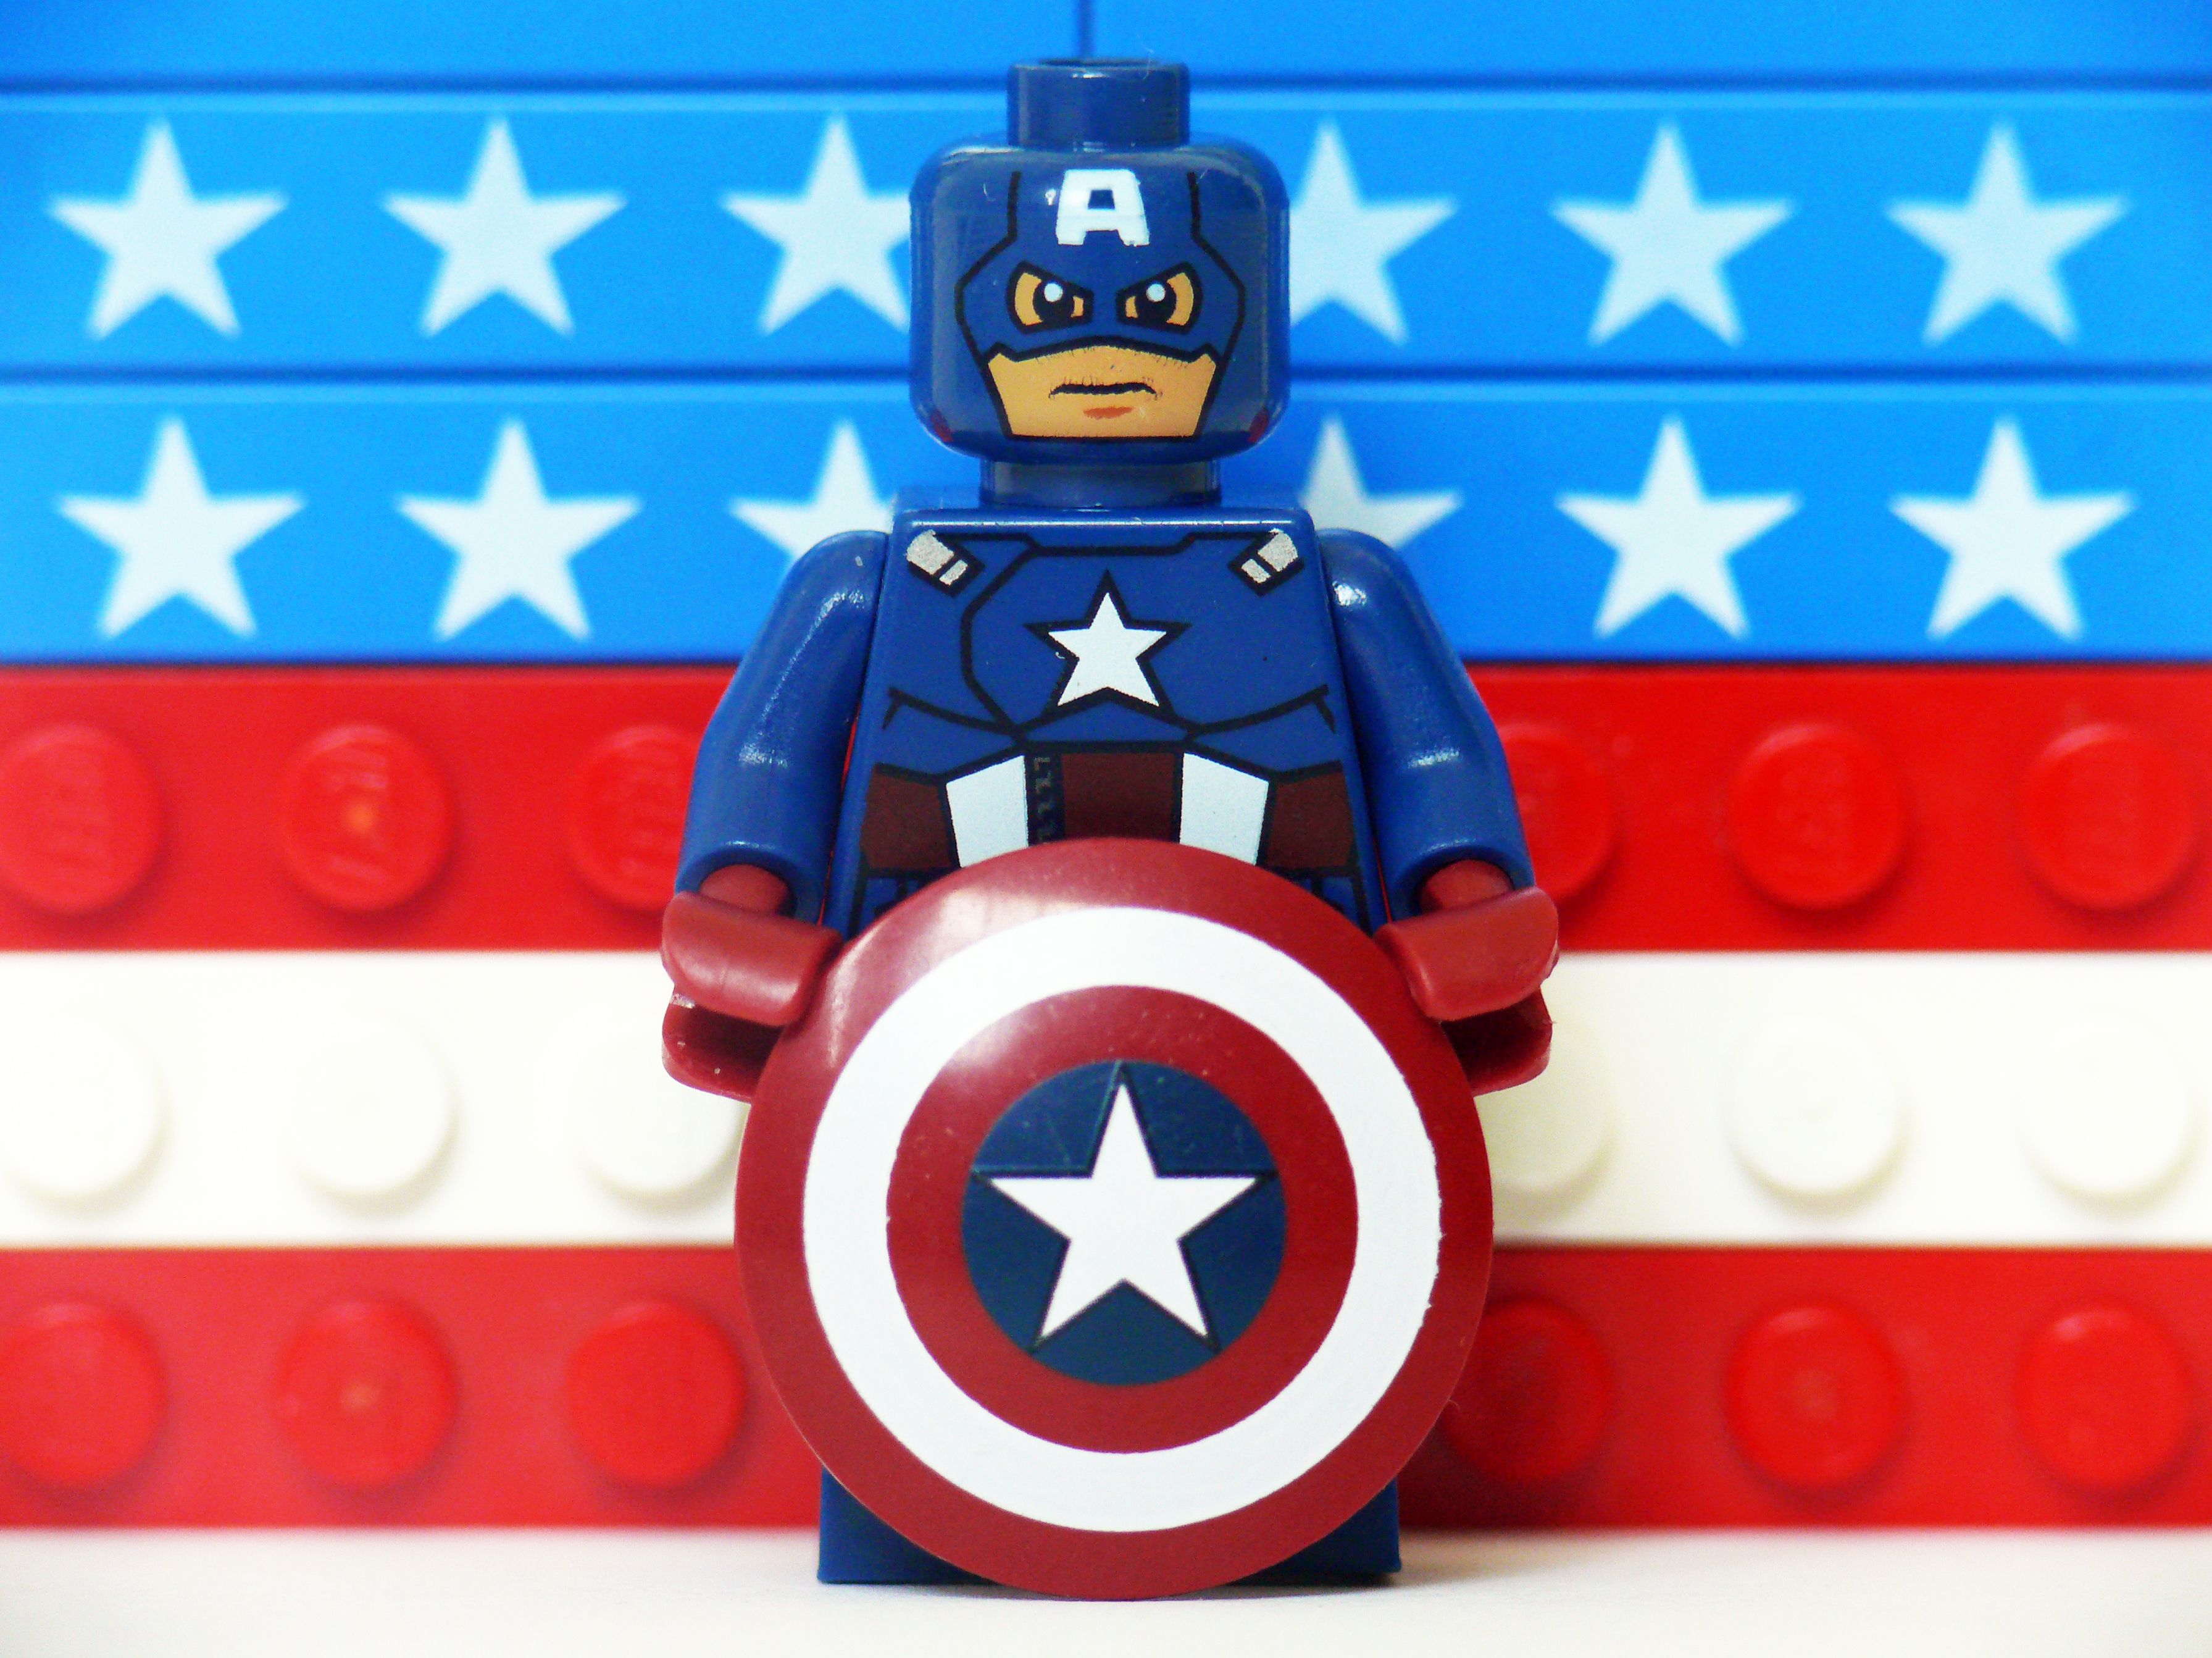 Wallpaper, Toy, superhero, Captain America, product, fictional character 3583x2685